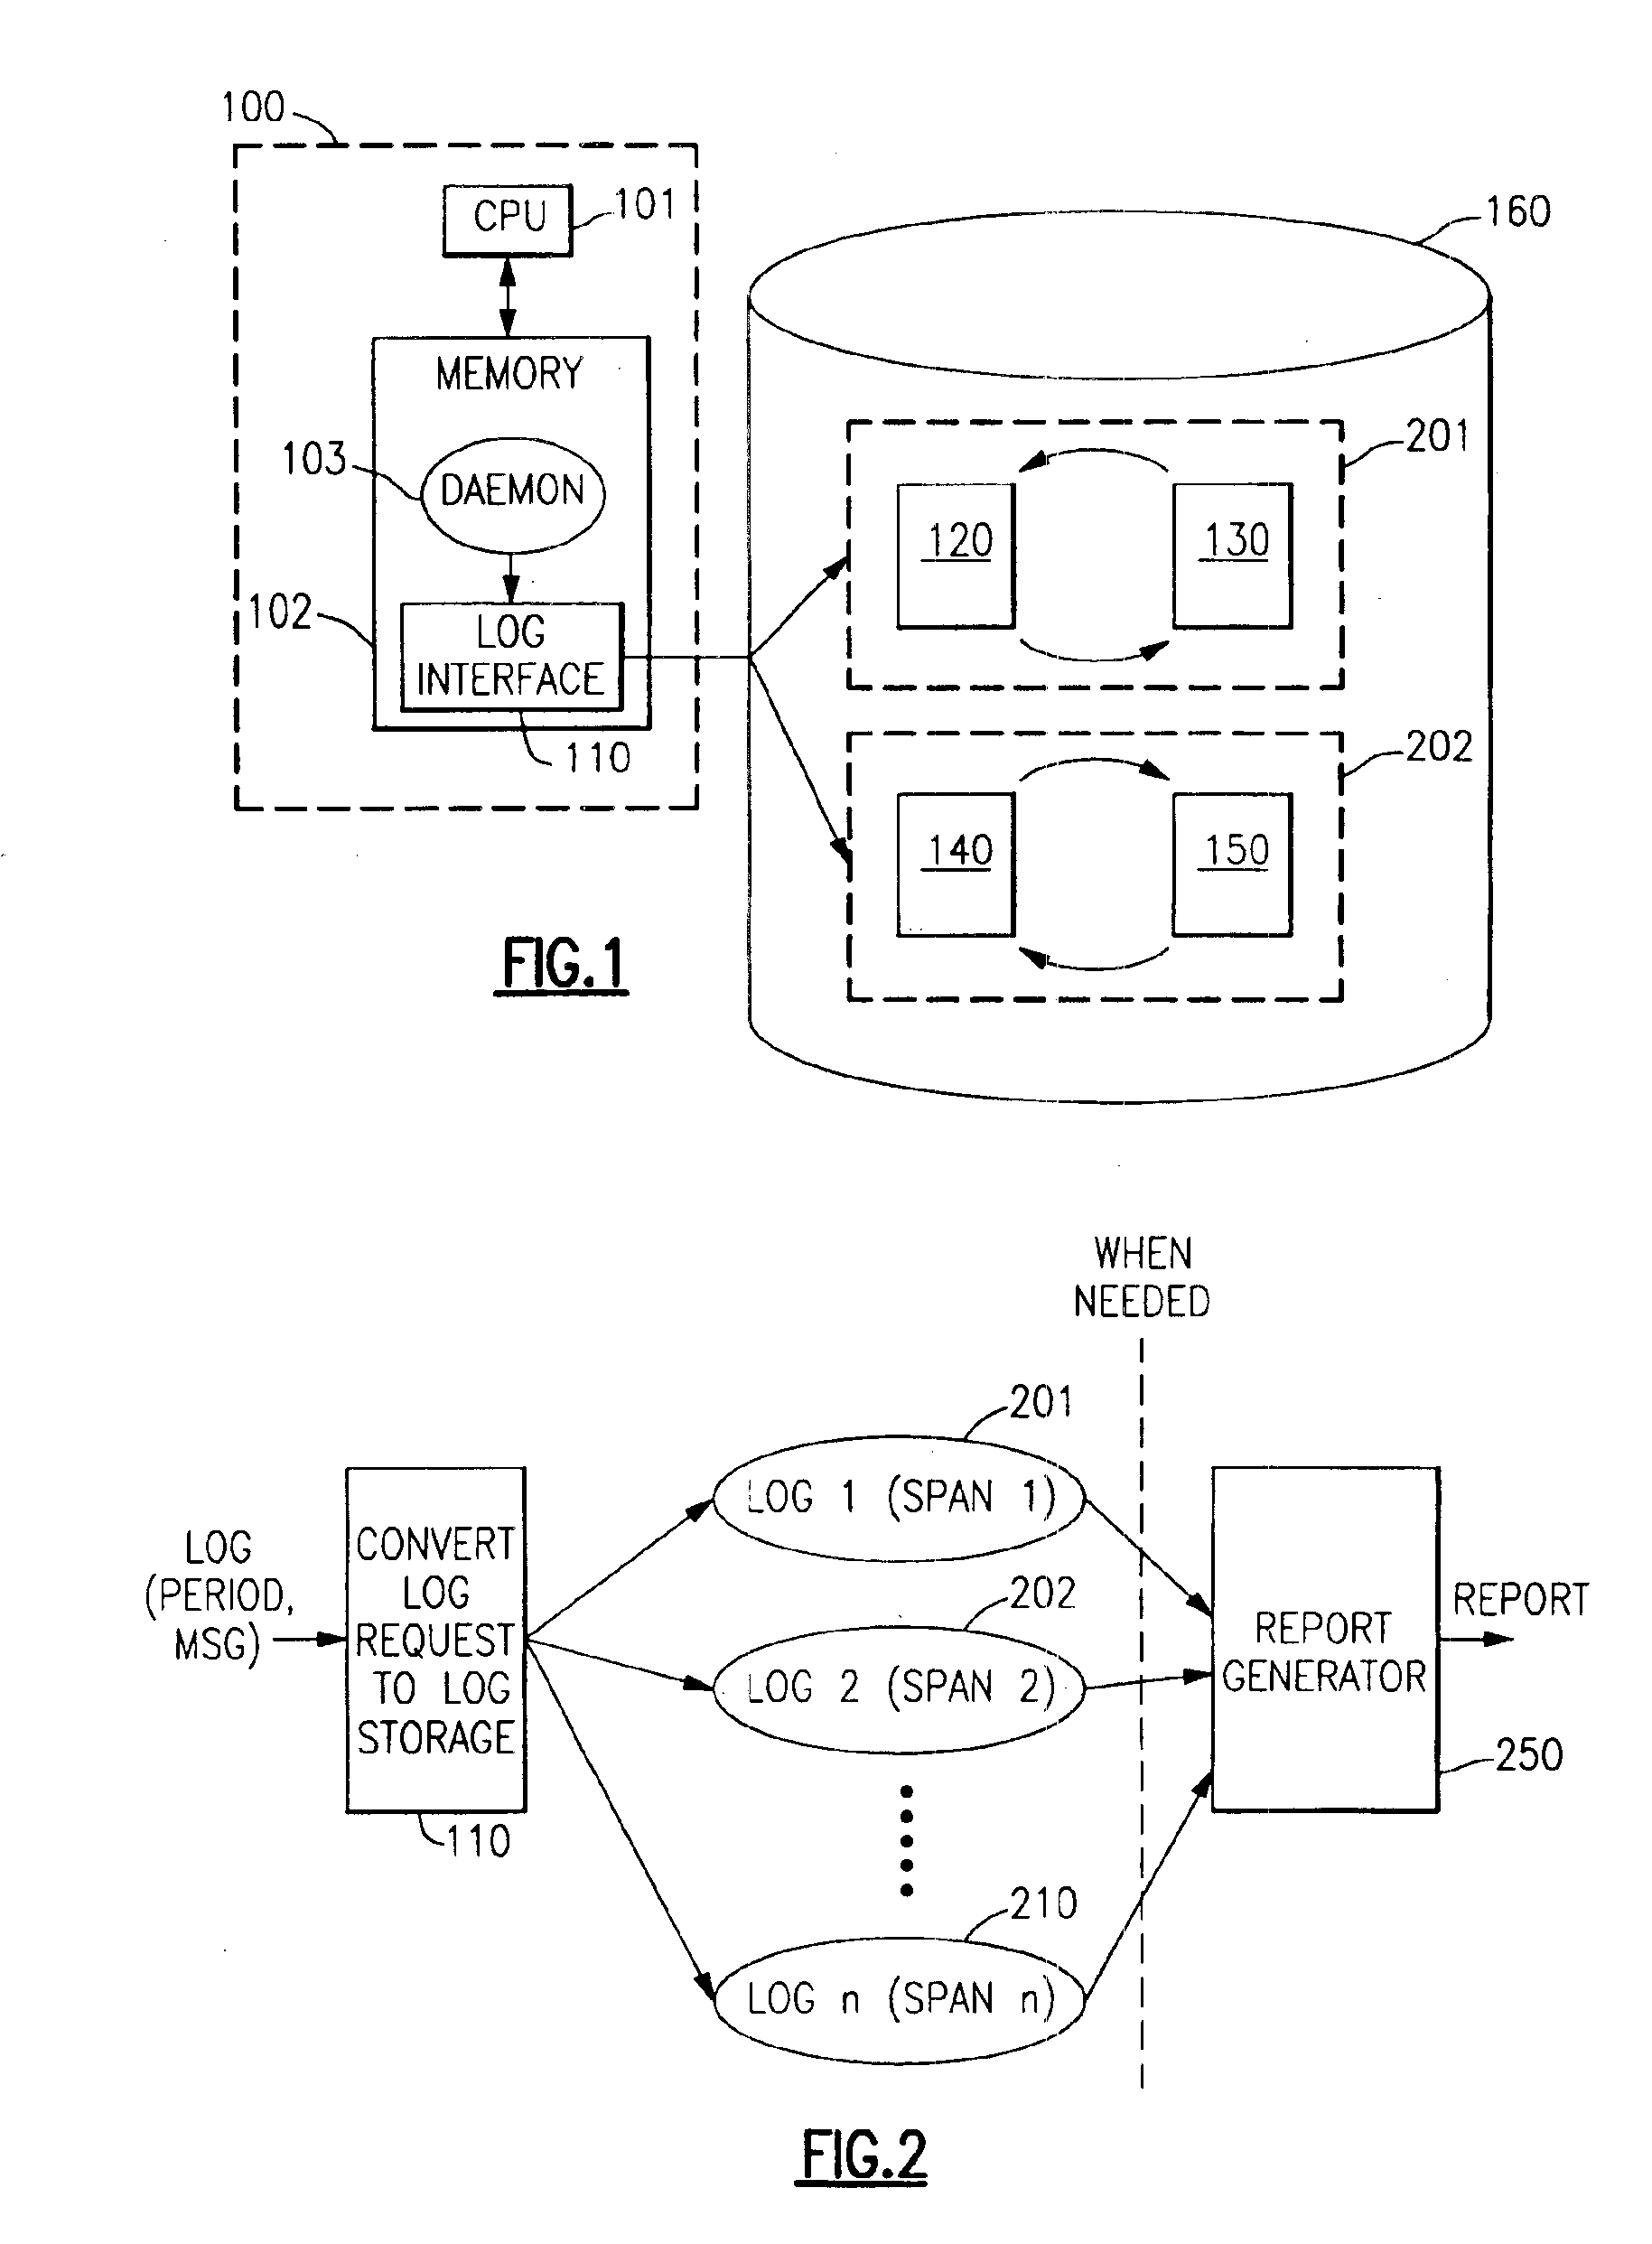 System and method for granular control of message logging